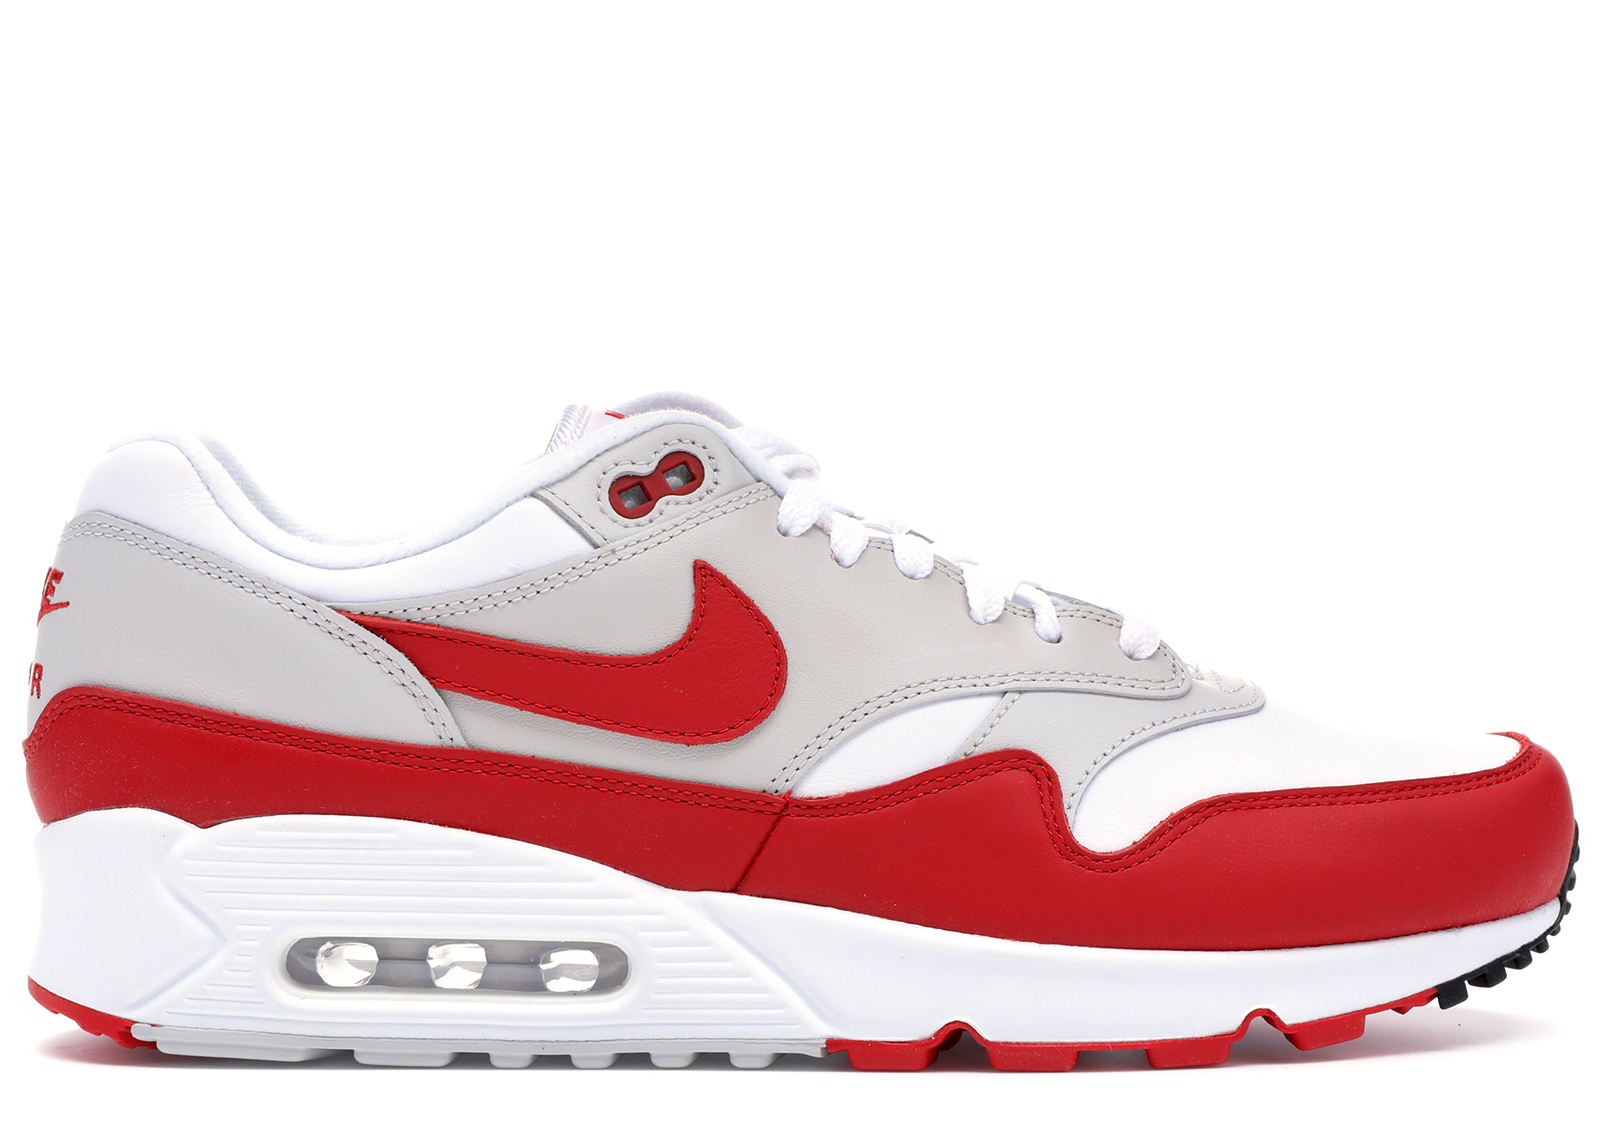 Nike Air Max 1 '86 OG Big Bubble Sport Red (Women's) - DO9844-100 - US